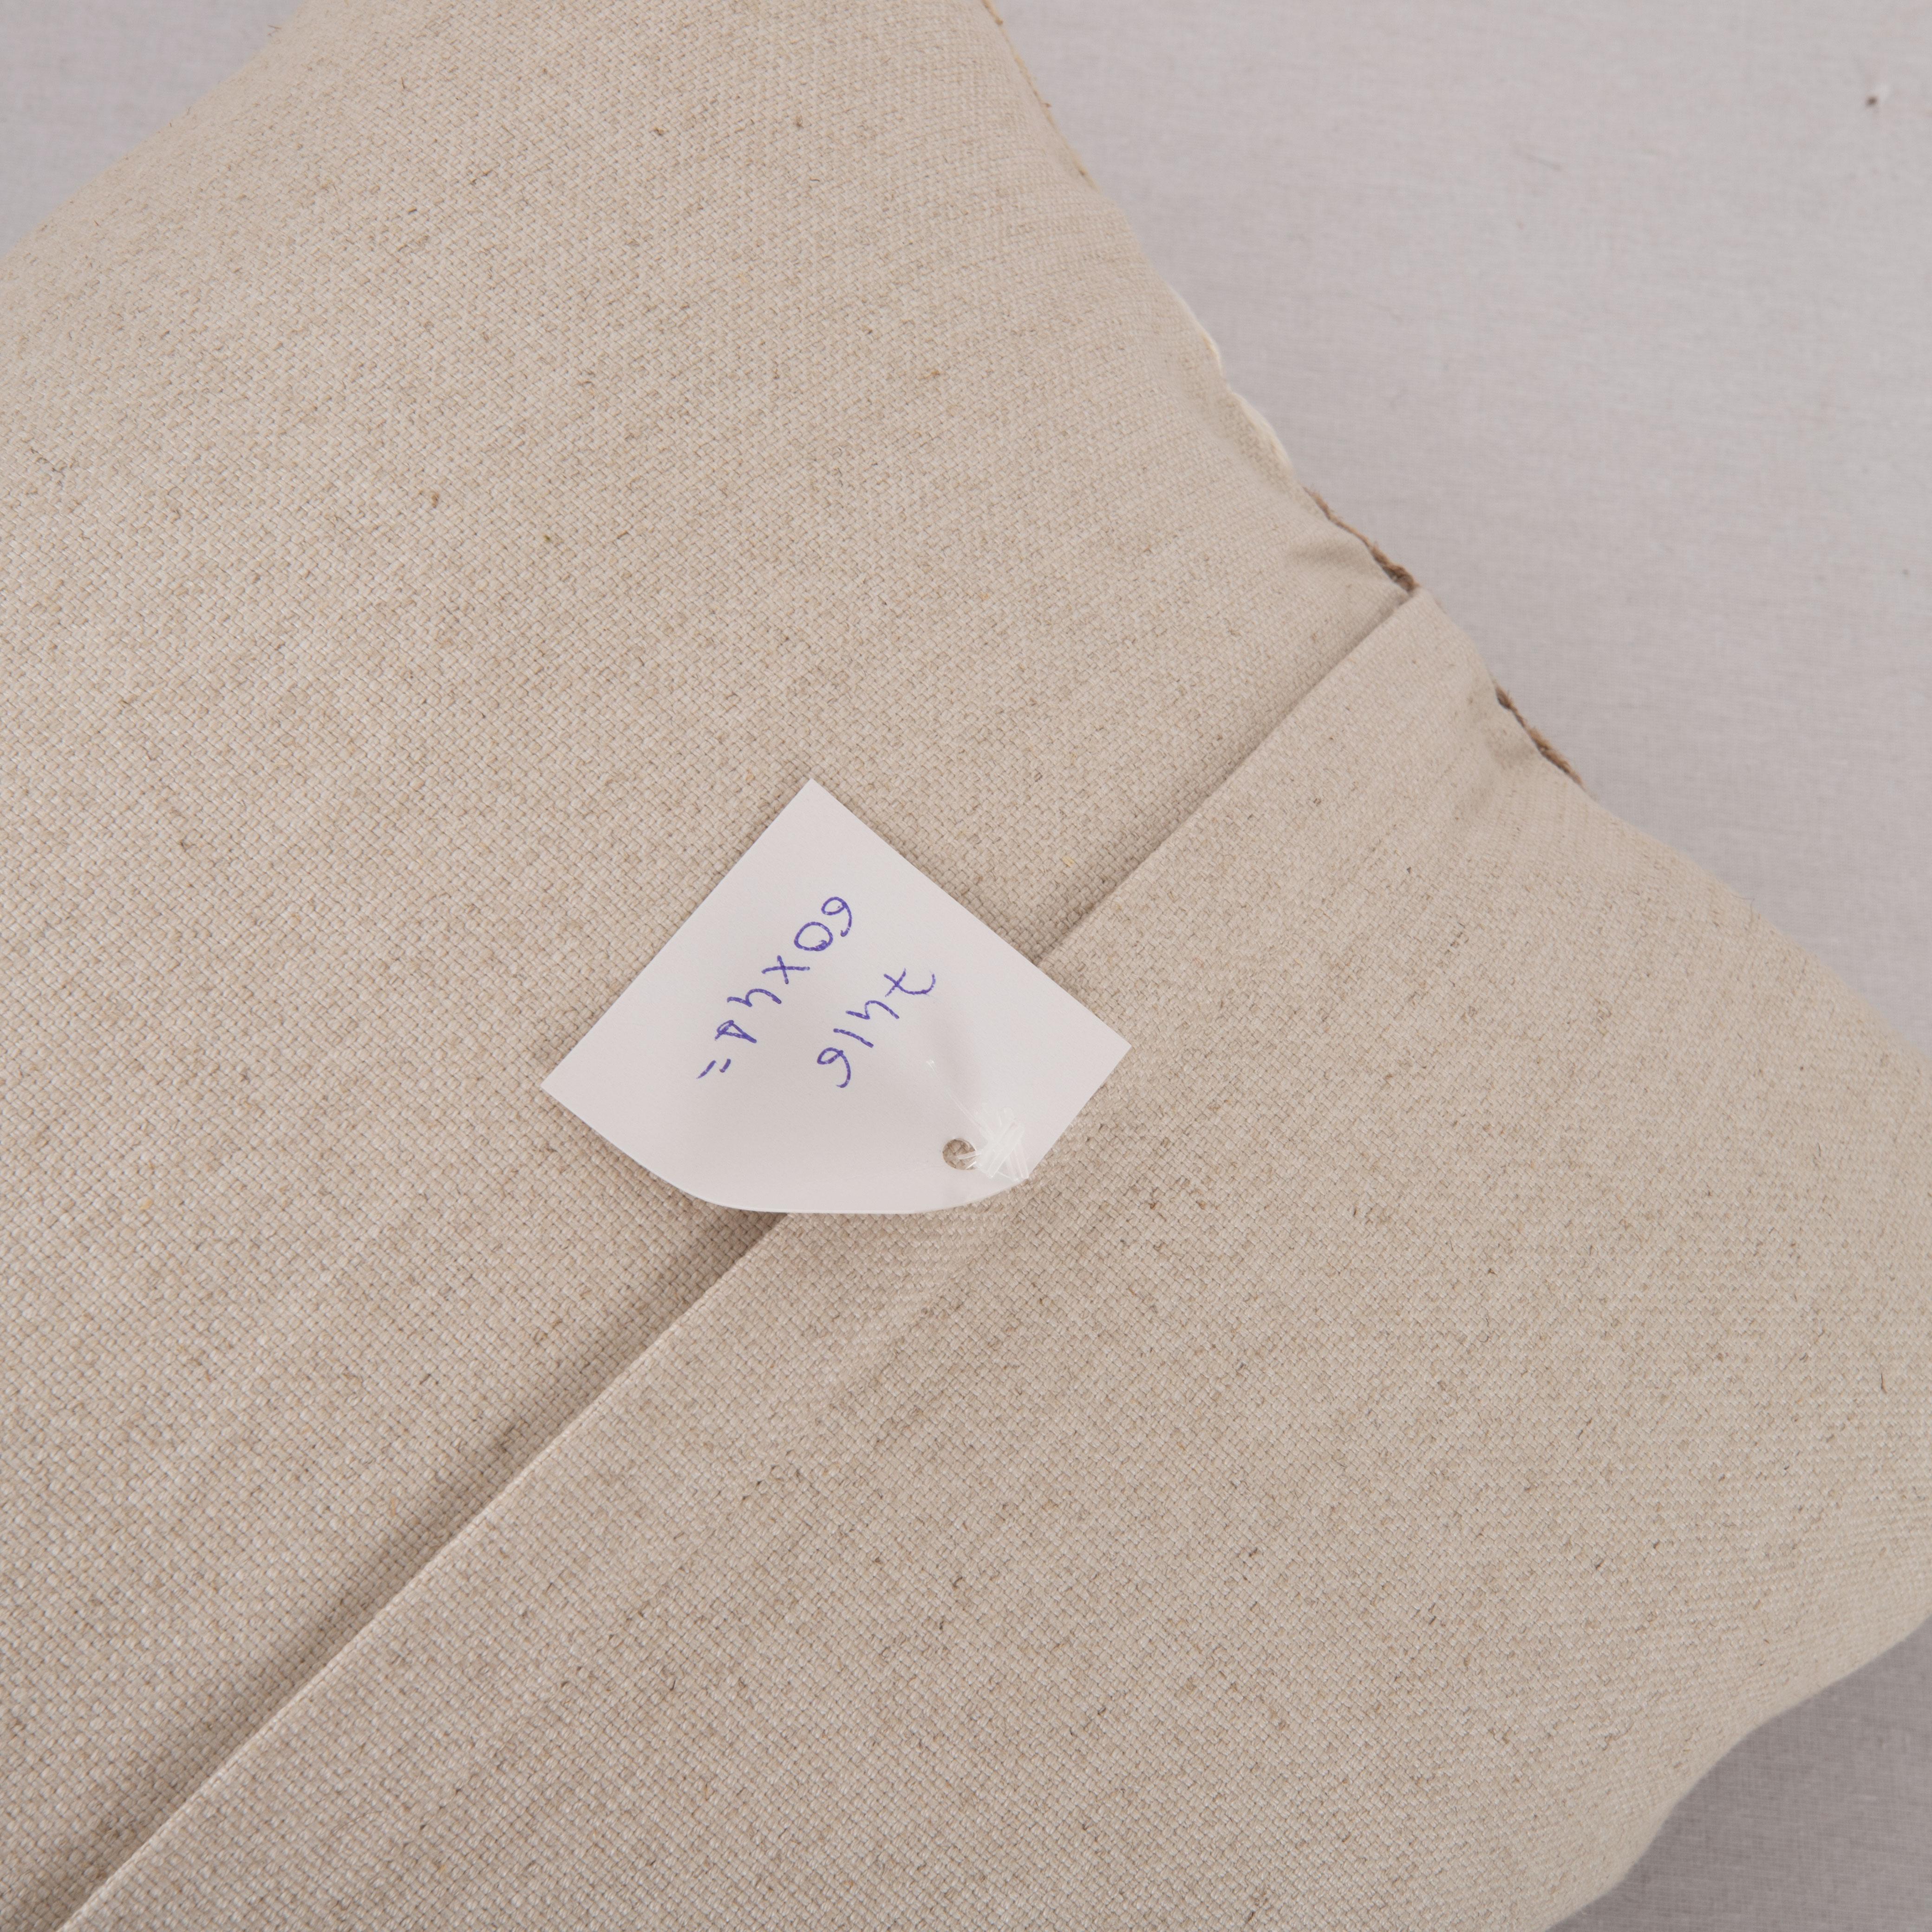 20th Century Rustic Pillow Case Made from a Vintage Un-Dyed Wool Coverlet, Mid 20th C For Sale